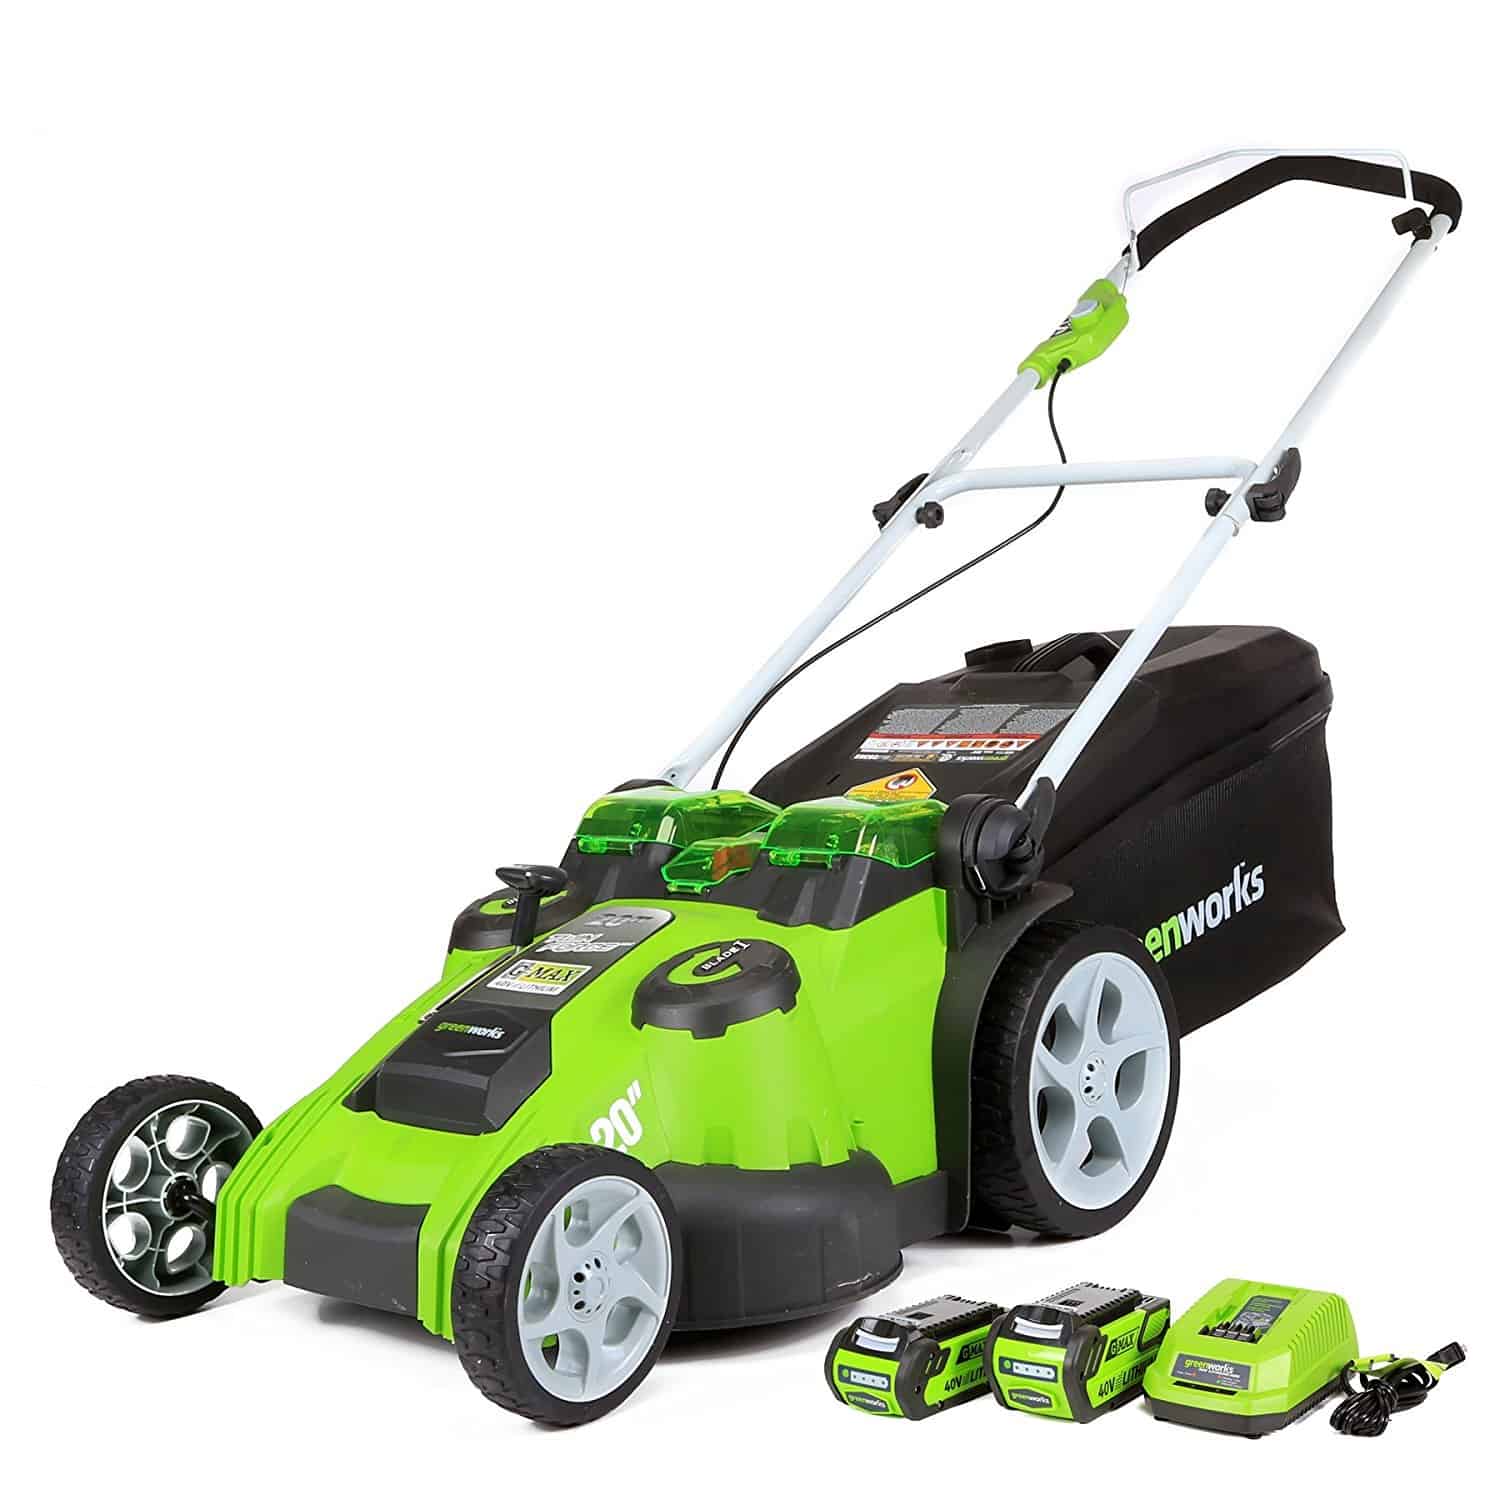 Greenworks 20-Inch 40V Twin Force Cordless Lawn Mower 25302